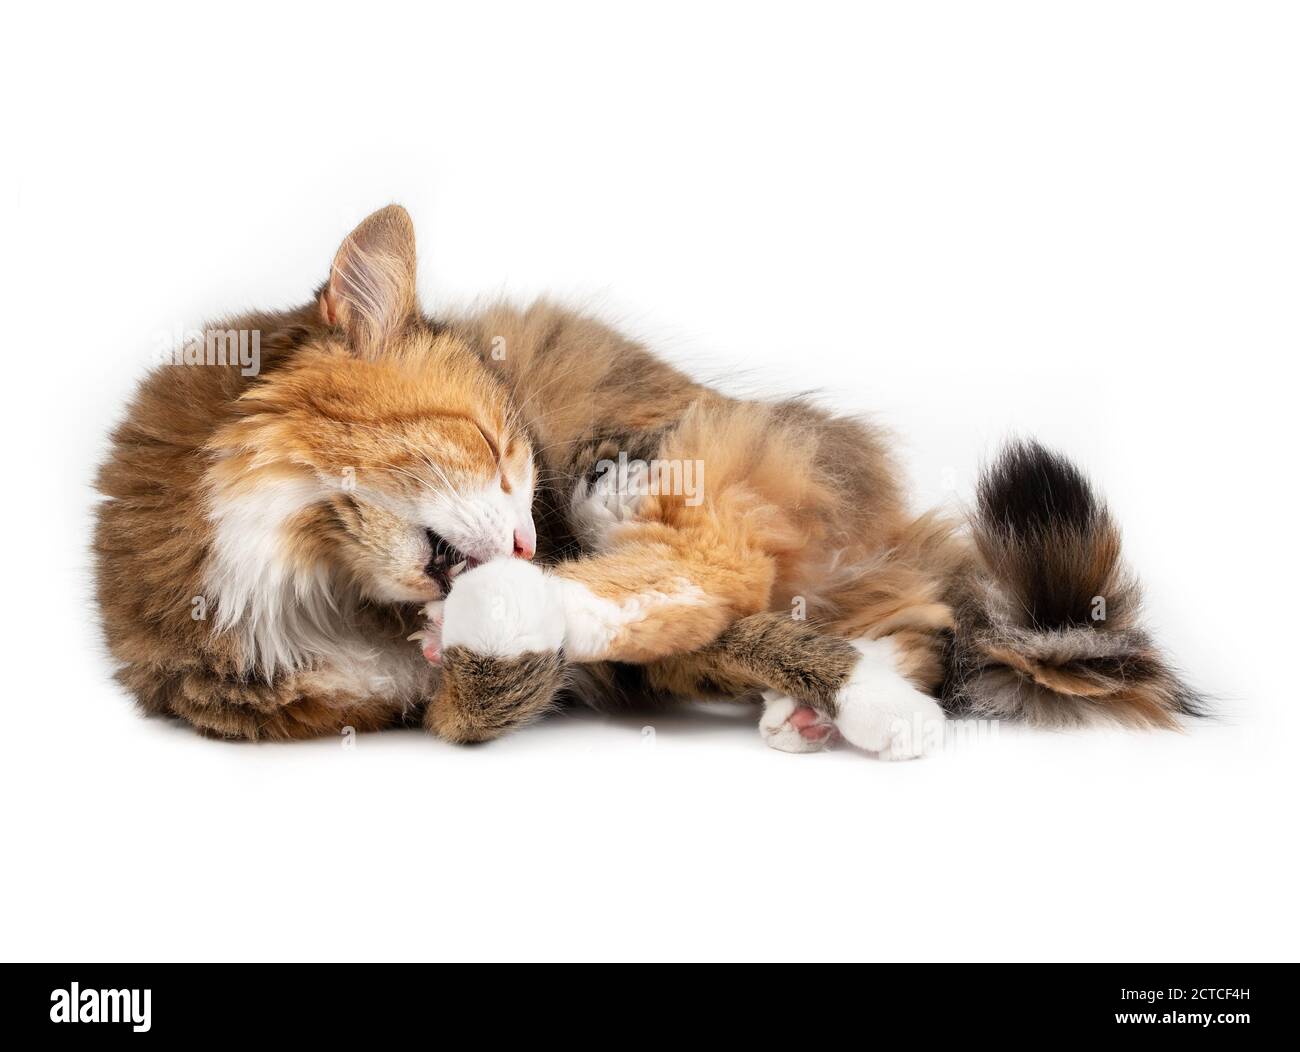 Adorable cat cleaning itself, lying sideways. Full body portrait of relaxed multicolored kitty licking her paw while waging her tail. Stock Photo